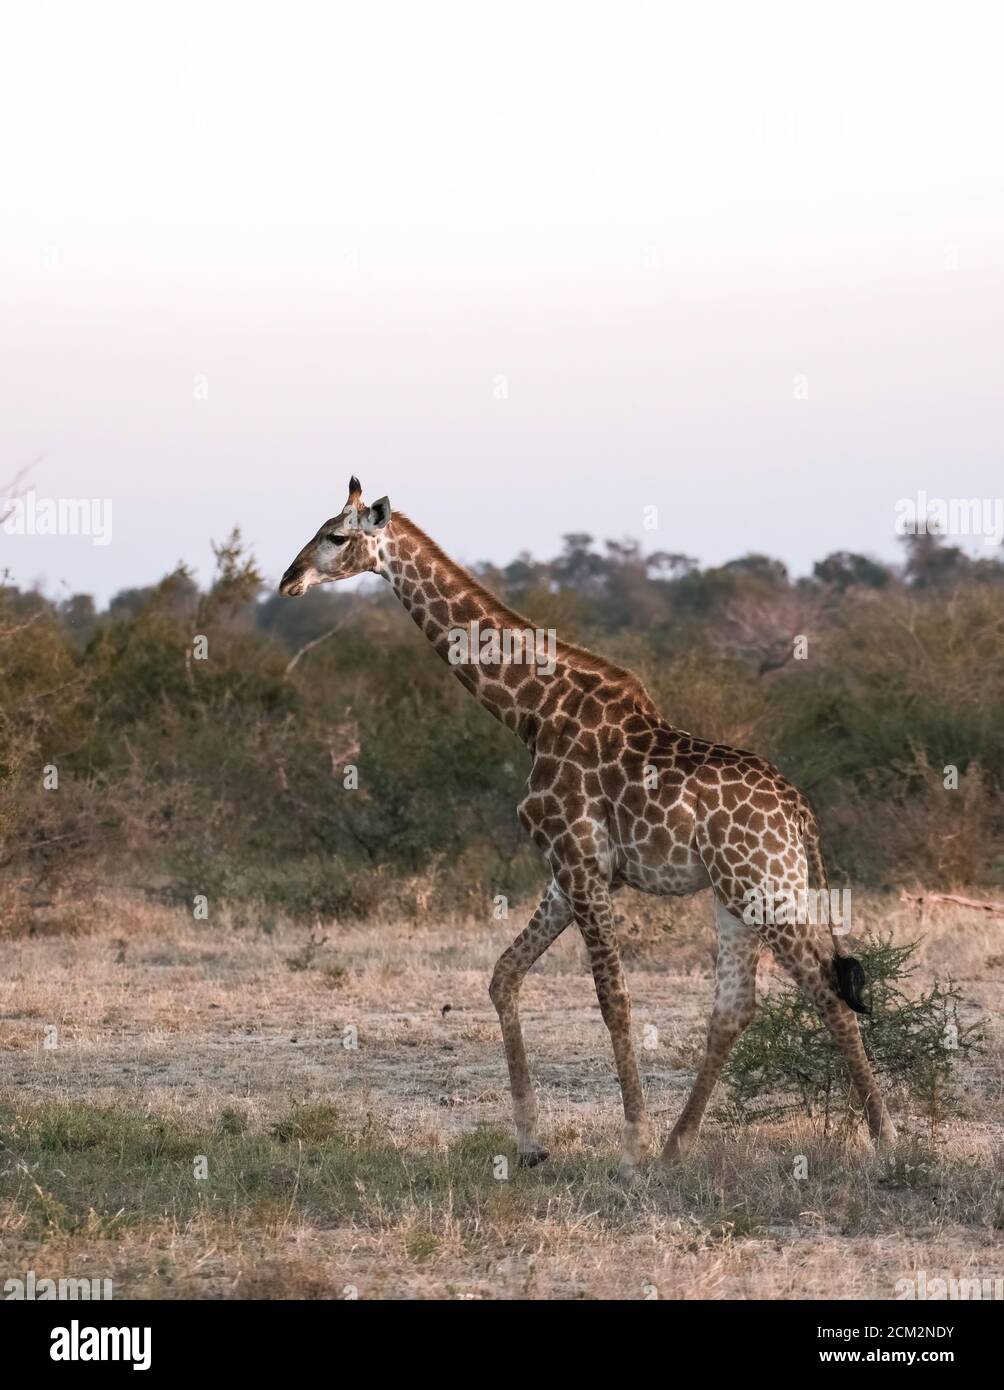 Beautiful wild giraffe with long neck and long legs walks in the South African wilderness. Stock Photo